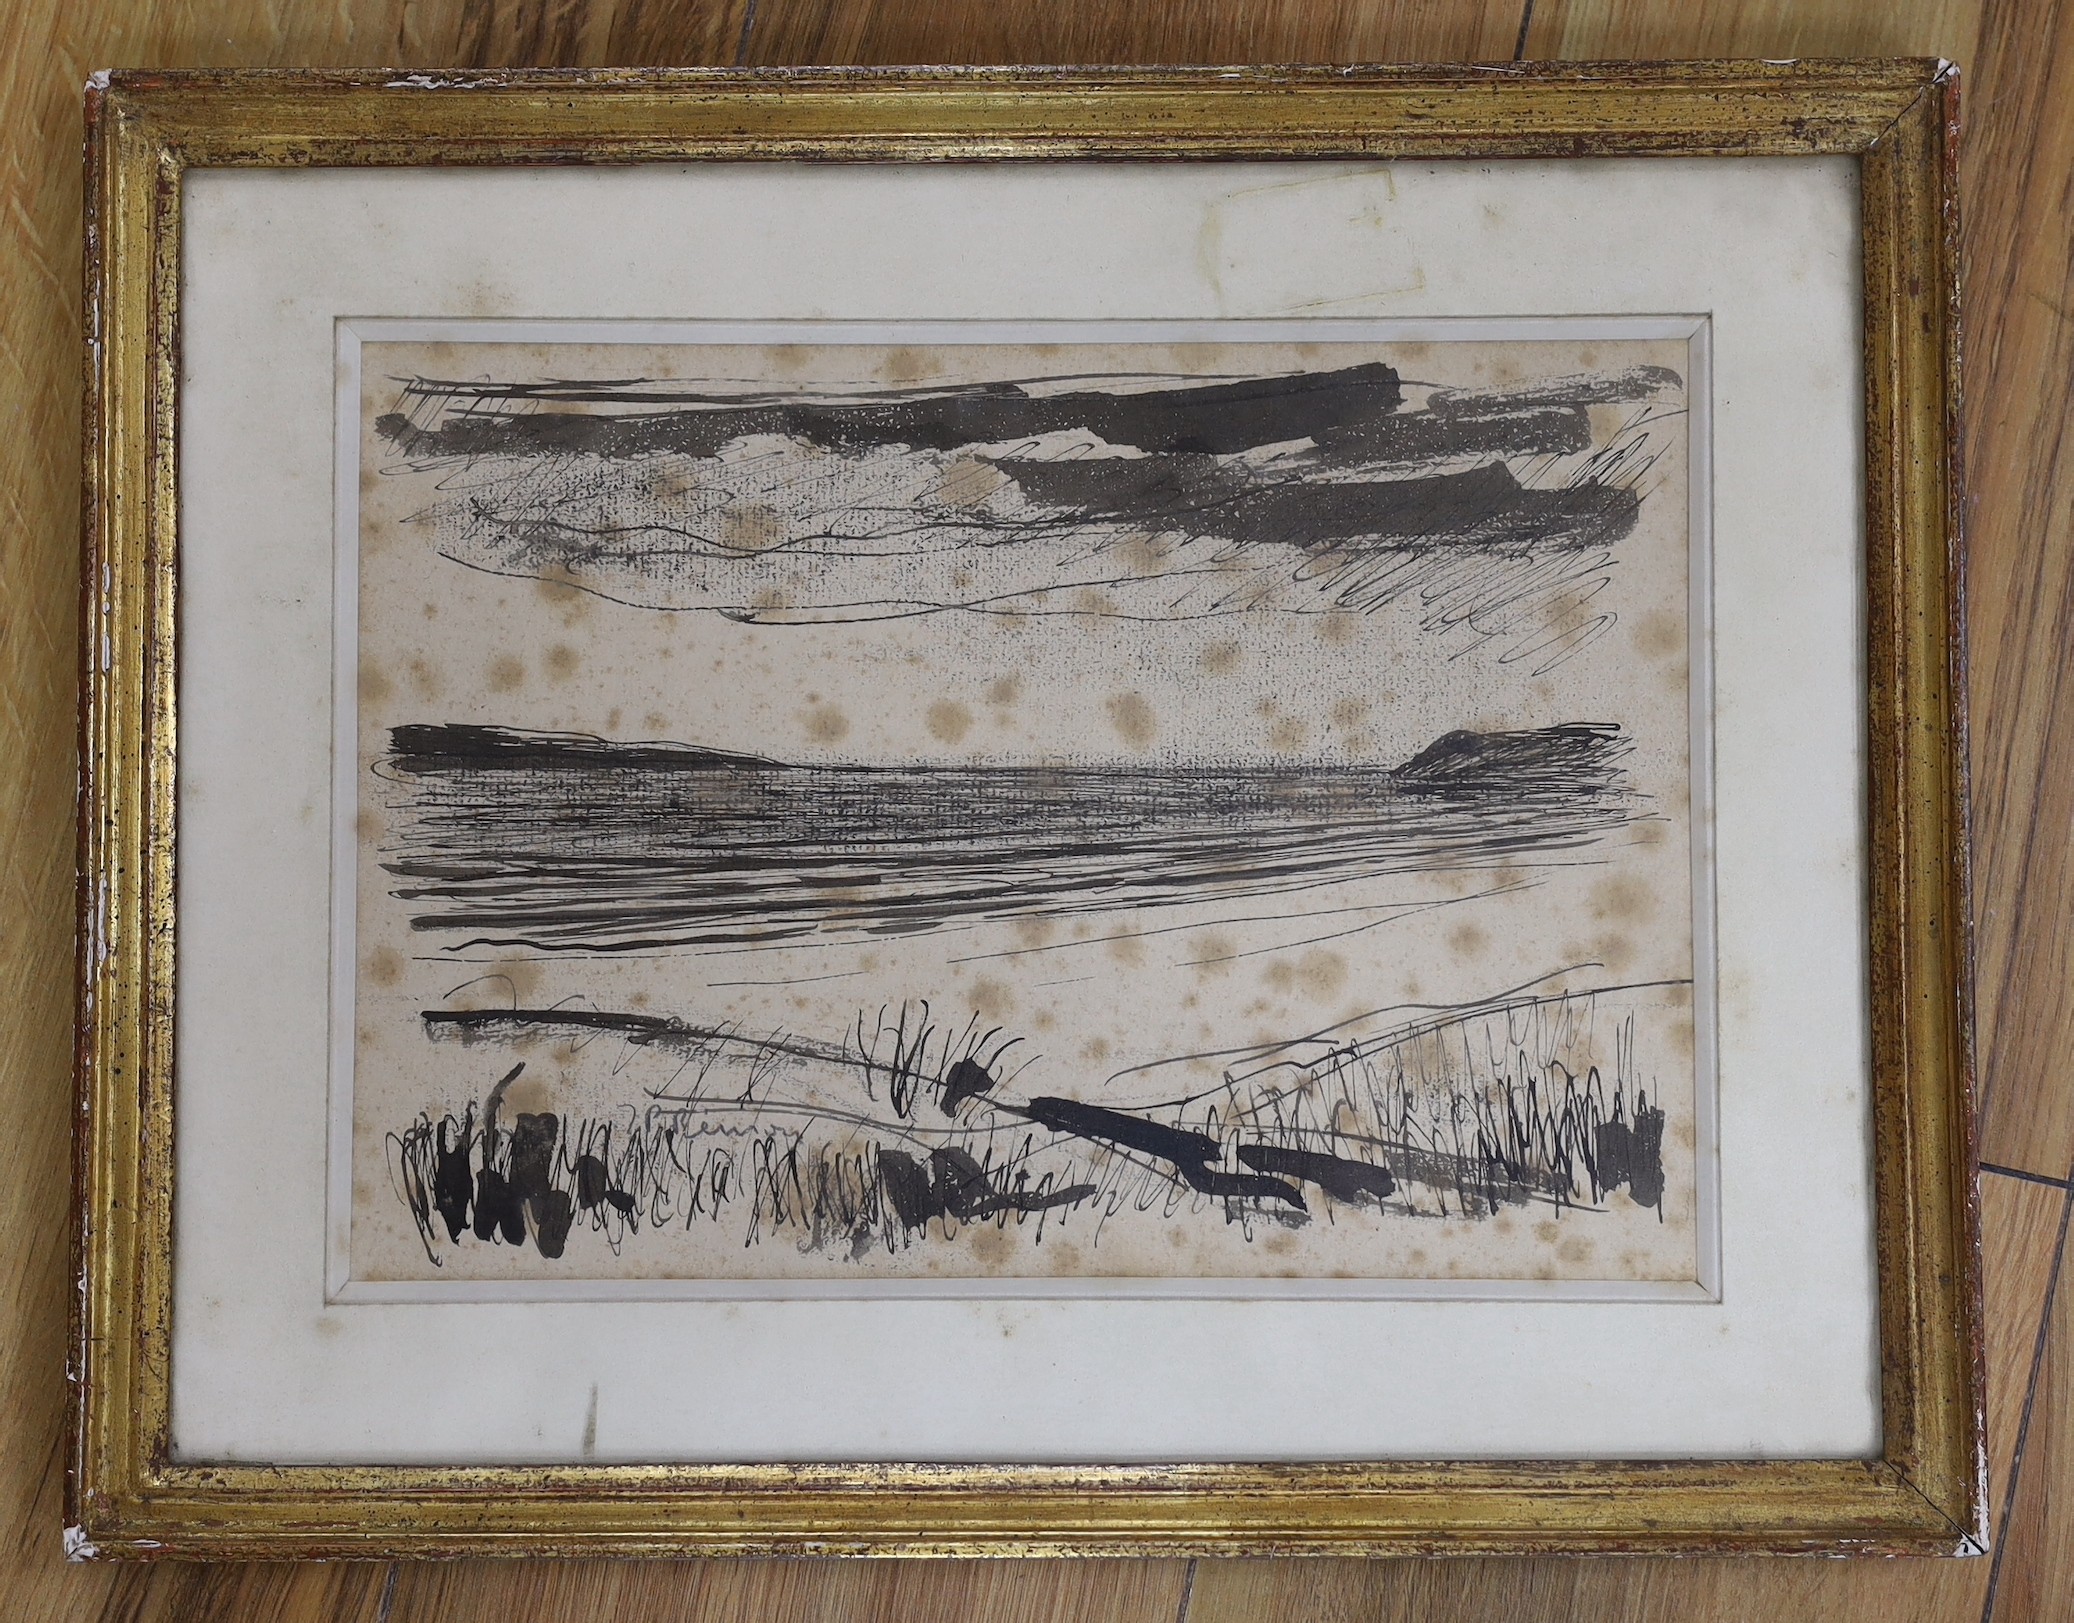 Jean Pierre Renoir (1894-1979), ink and wash on paper, North African coastal landscape, signed and inscribed verso 'To Winston Churchill' and dated January 1951, 19 x 27cm